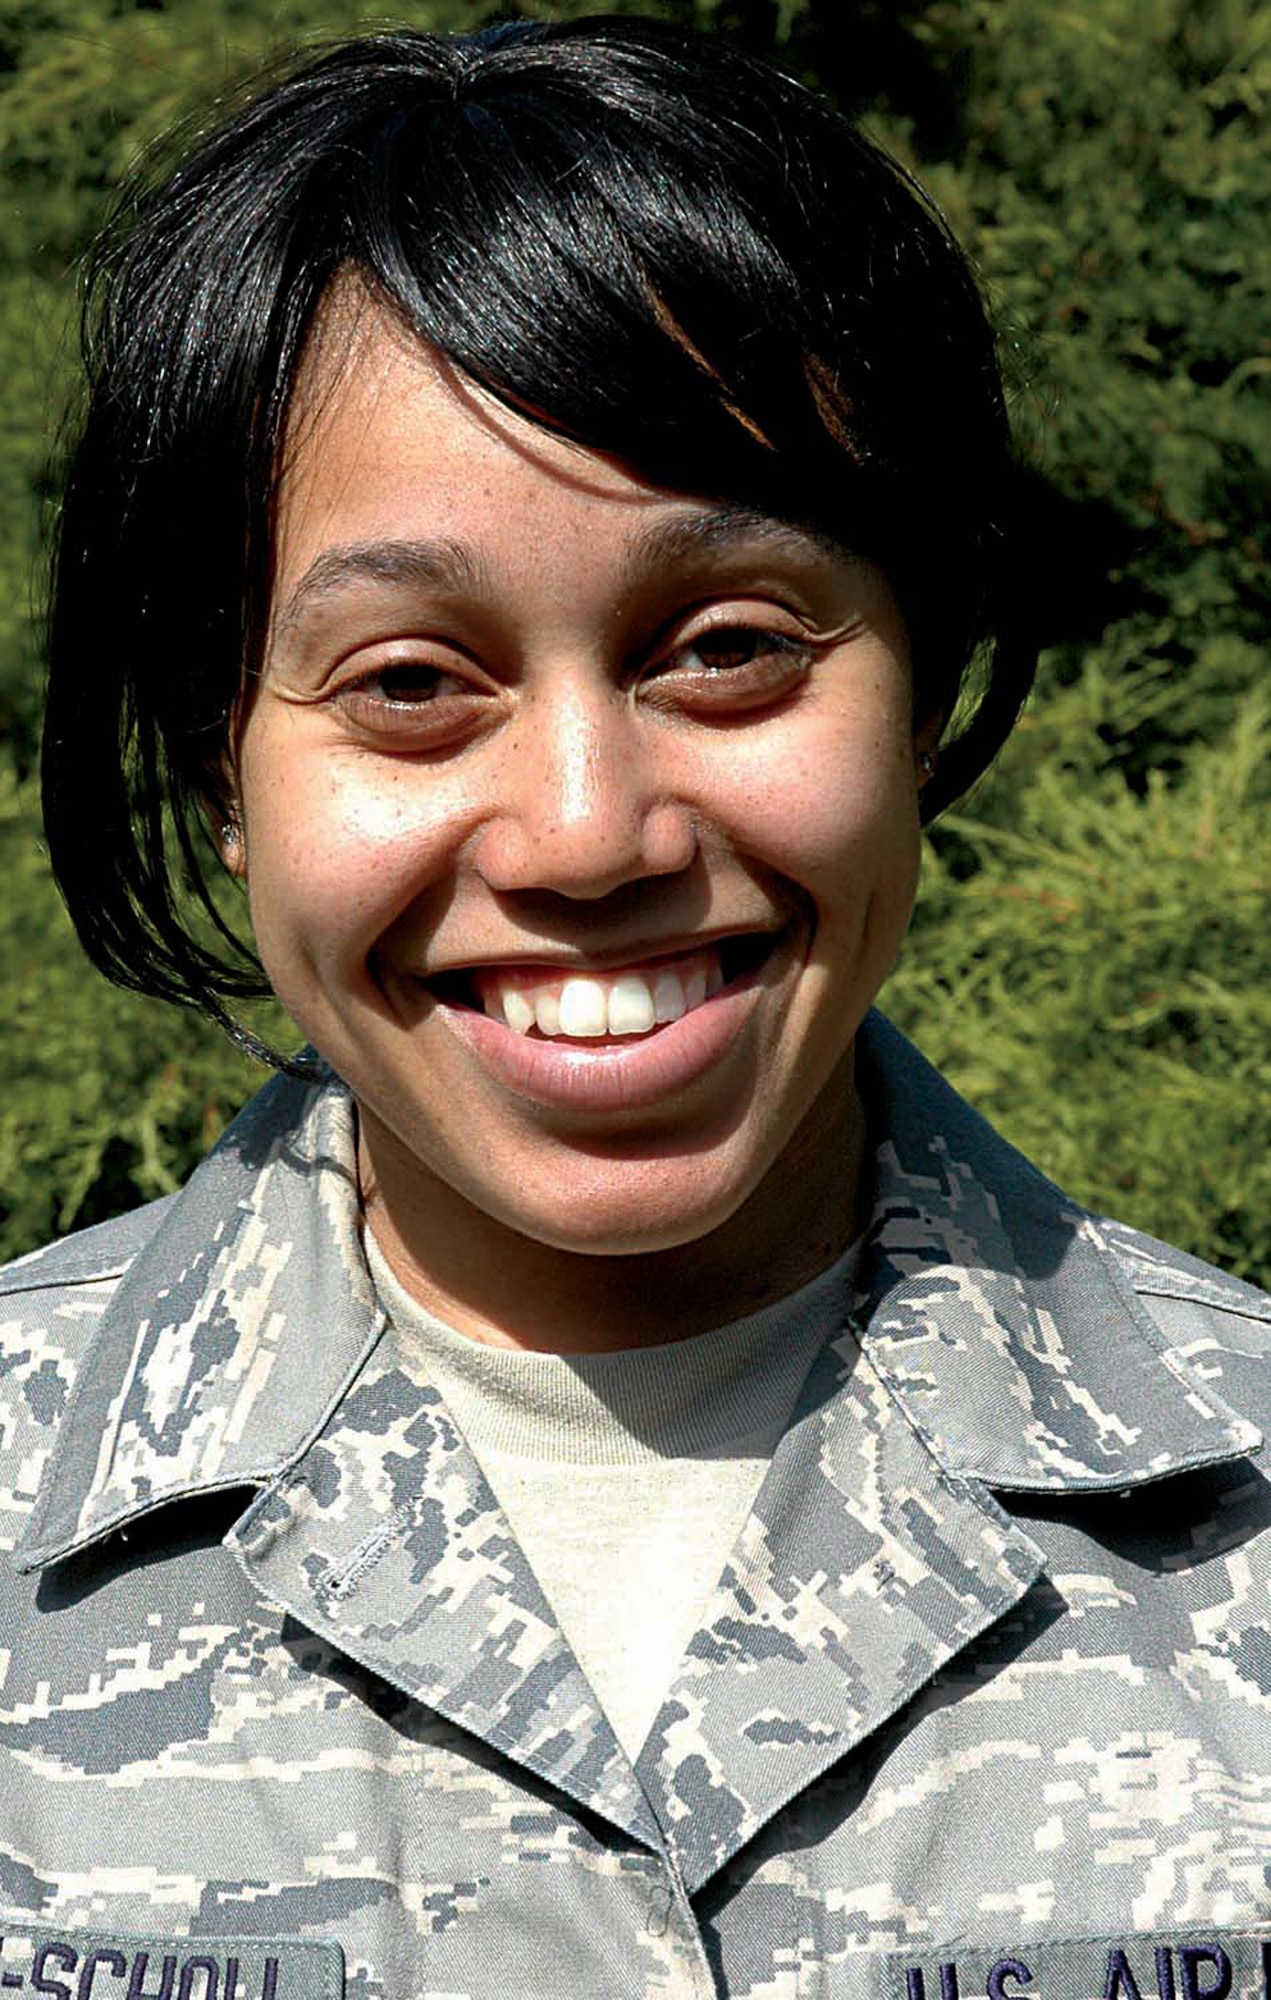 Senior Airman Channel Bolton-Scholl, an aircraft maintenance technician with the 446th Maintenance Squadron at McChord AFB, Wash., played an important role in an Operation Deep Freeze deployment where she provided maintenance support for an aeromedical evacuation mission of an injured scientist.  The Air Force Chief of Staff reviews the selections. The selections for the 2009 12 Outstanding Airmen of the Year were announced July 2 by Air Force officials at Randolph Air Force Base, Texas. (U.S. Air Force photo)